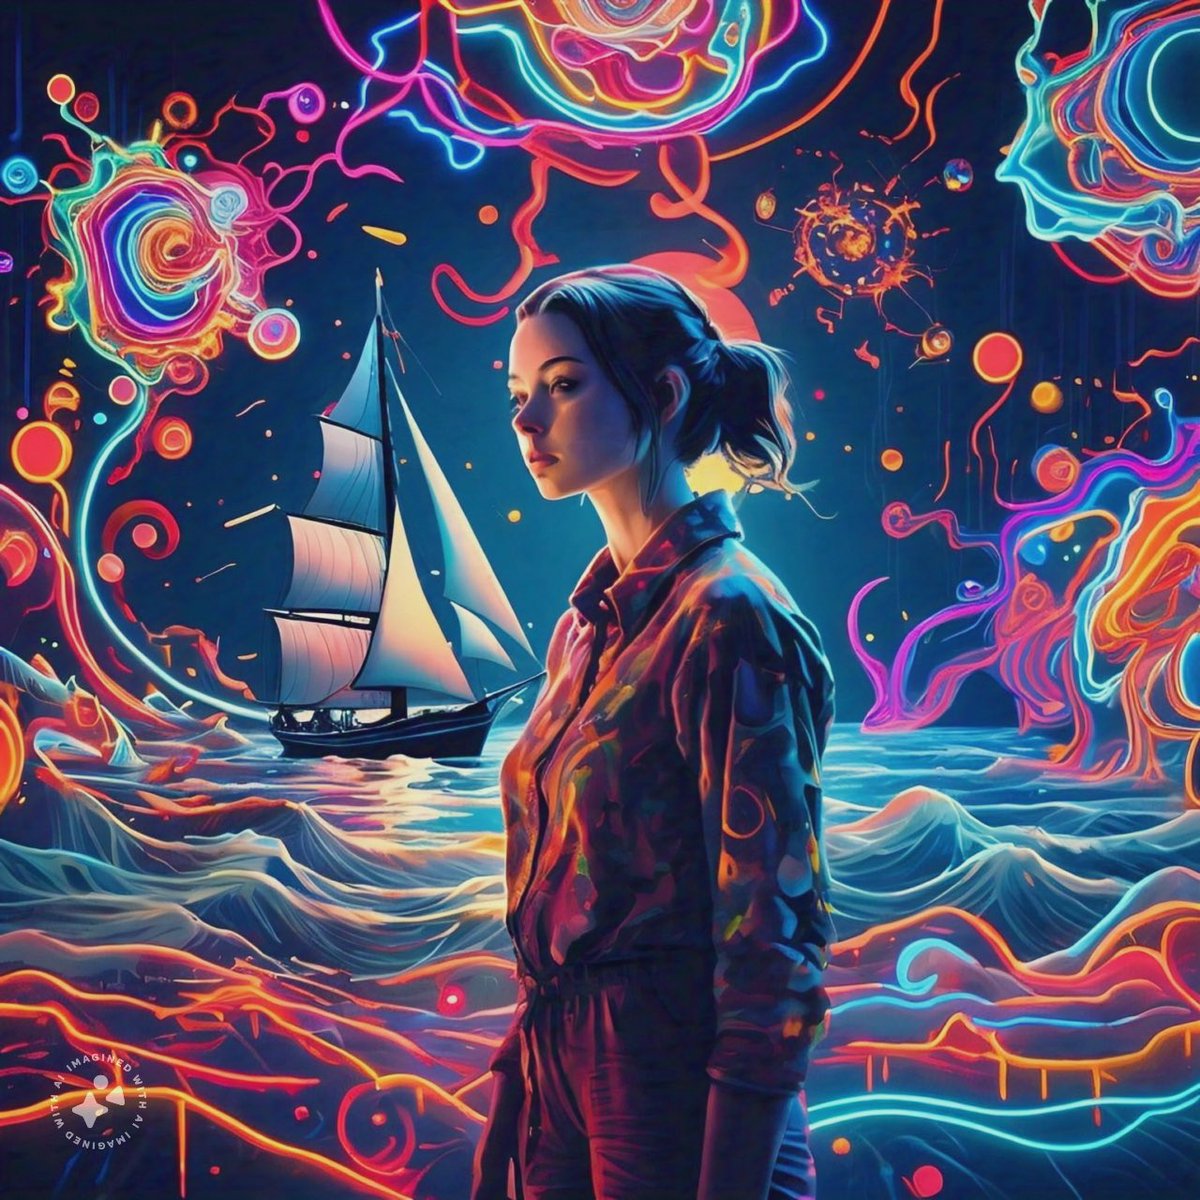 share:  A young woman surrounded by intricate spatial pattern of colorful glowing Neon Rorschach inkblots, with 70s kung fu movie style circus clown painting of the most unusual image of a sailboat sailing into the setting sun with blue green white sails and sunset background.